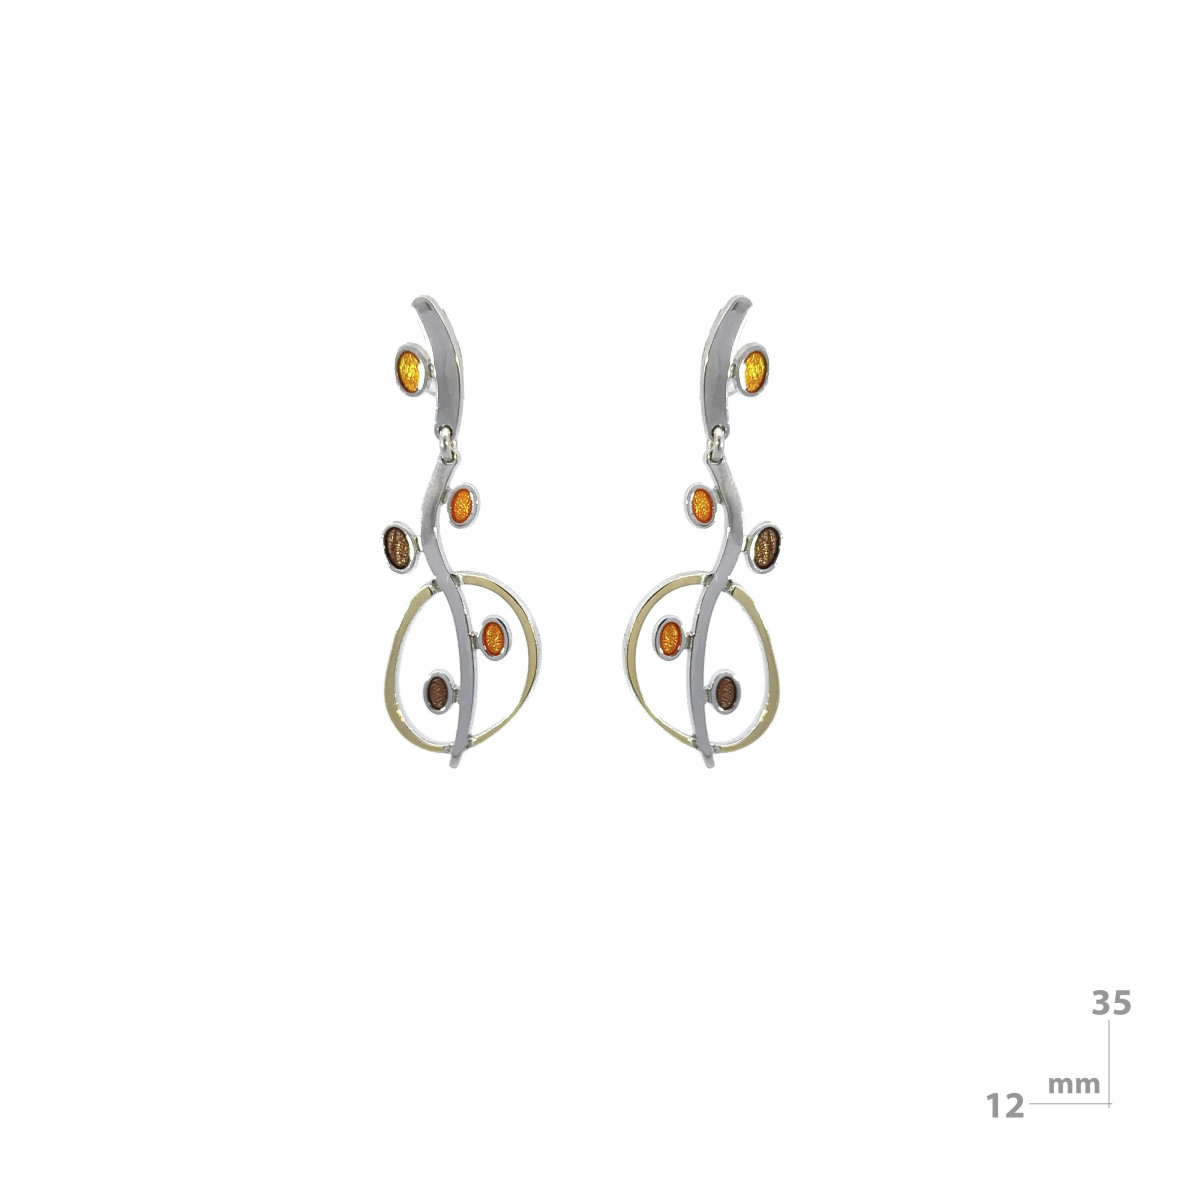 Earrings made of silver, gold and enamel